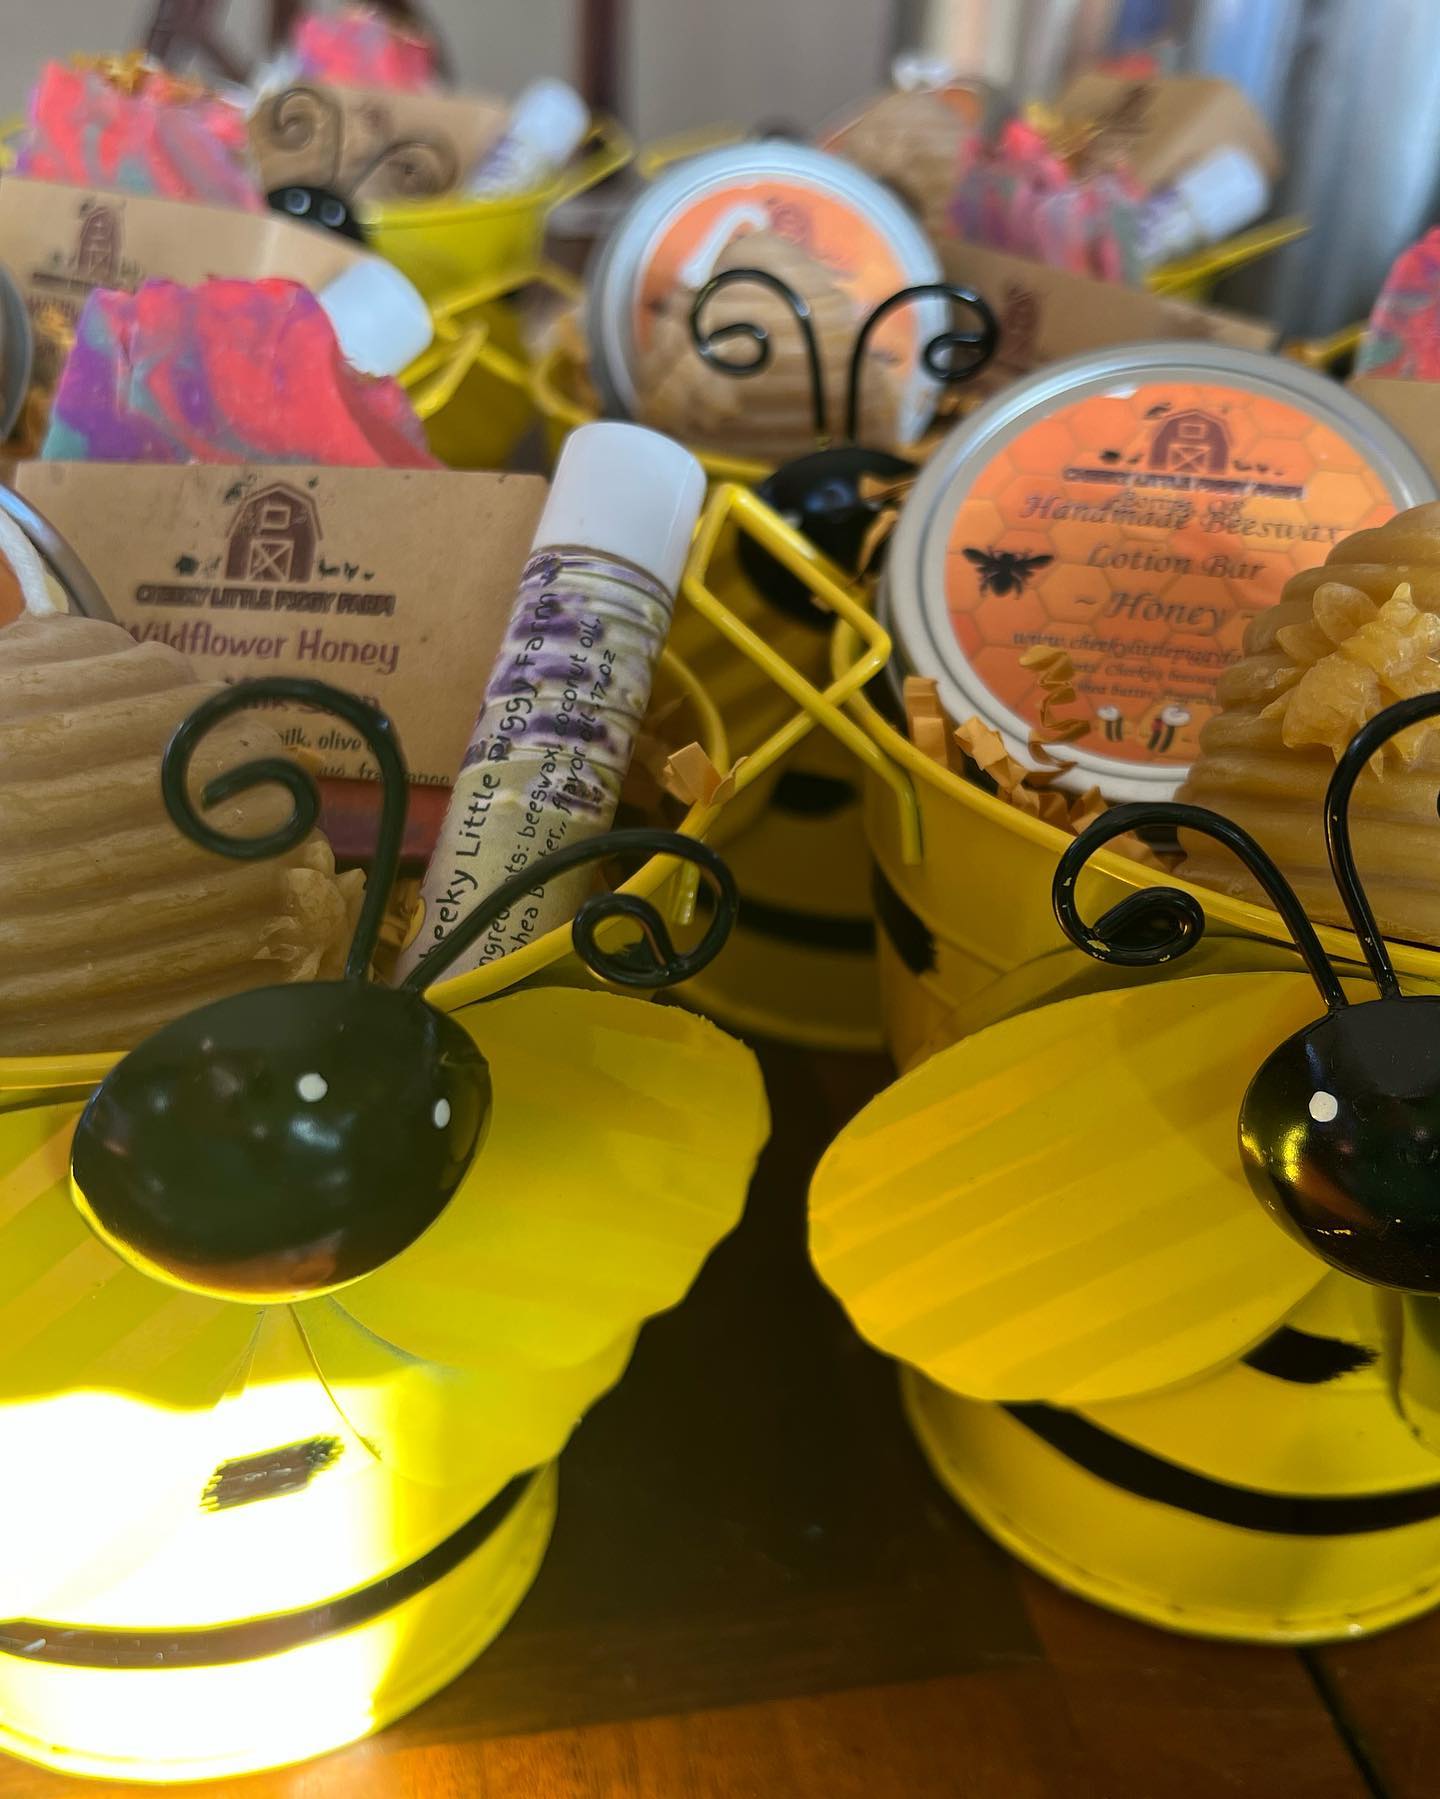 GIFTS FOR BEE LOVERS - Beekeeping Like A Girl